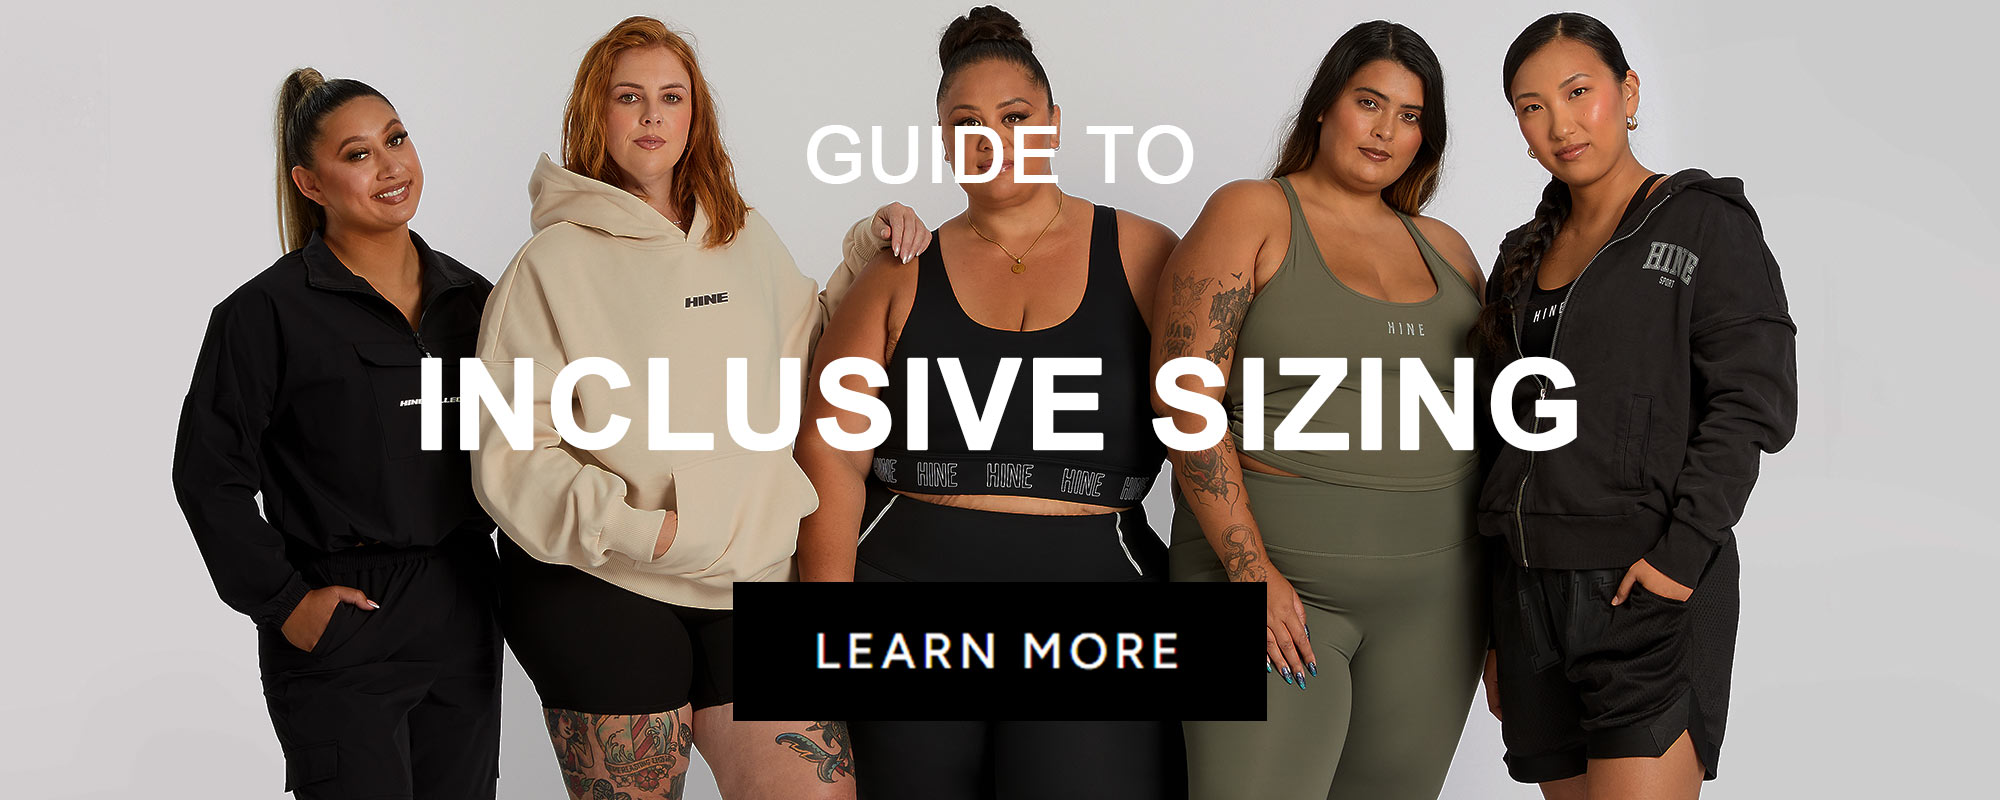 GUIDES_CLOTHES_InclusiveSizing.jpg